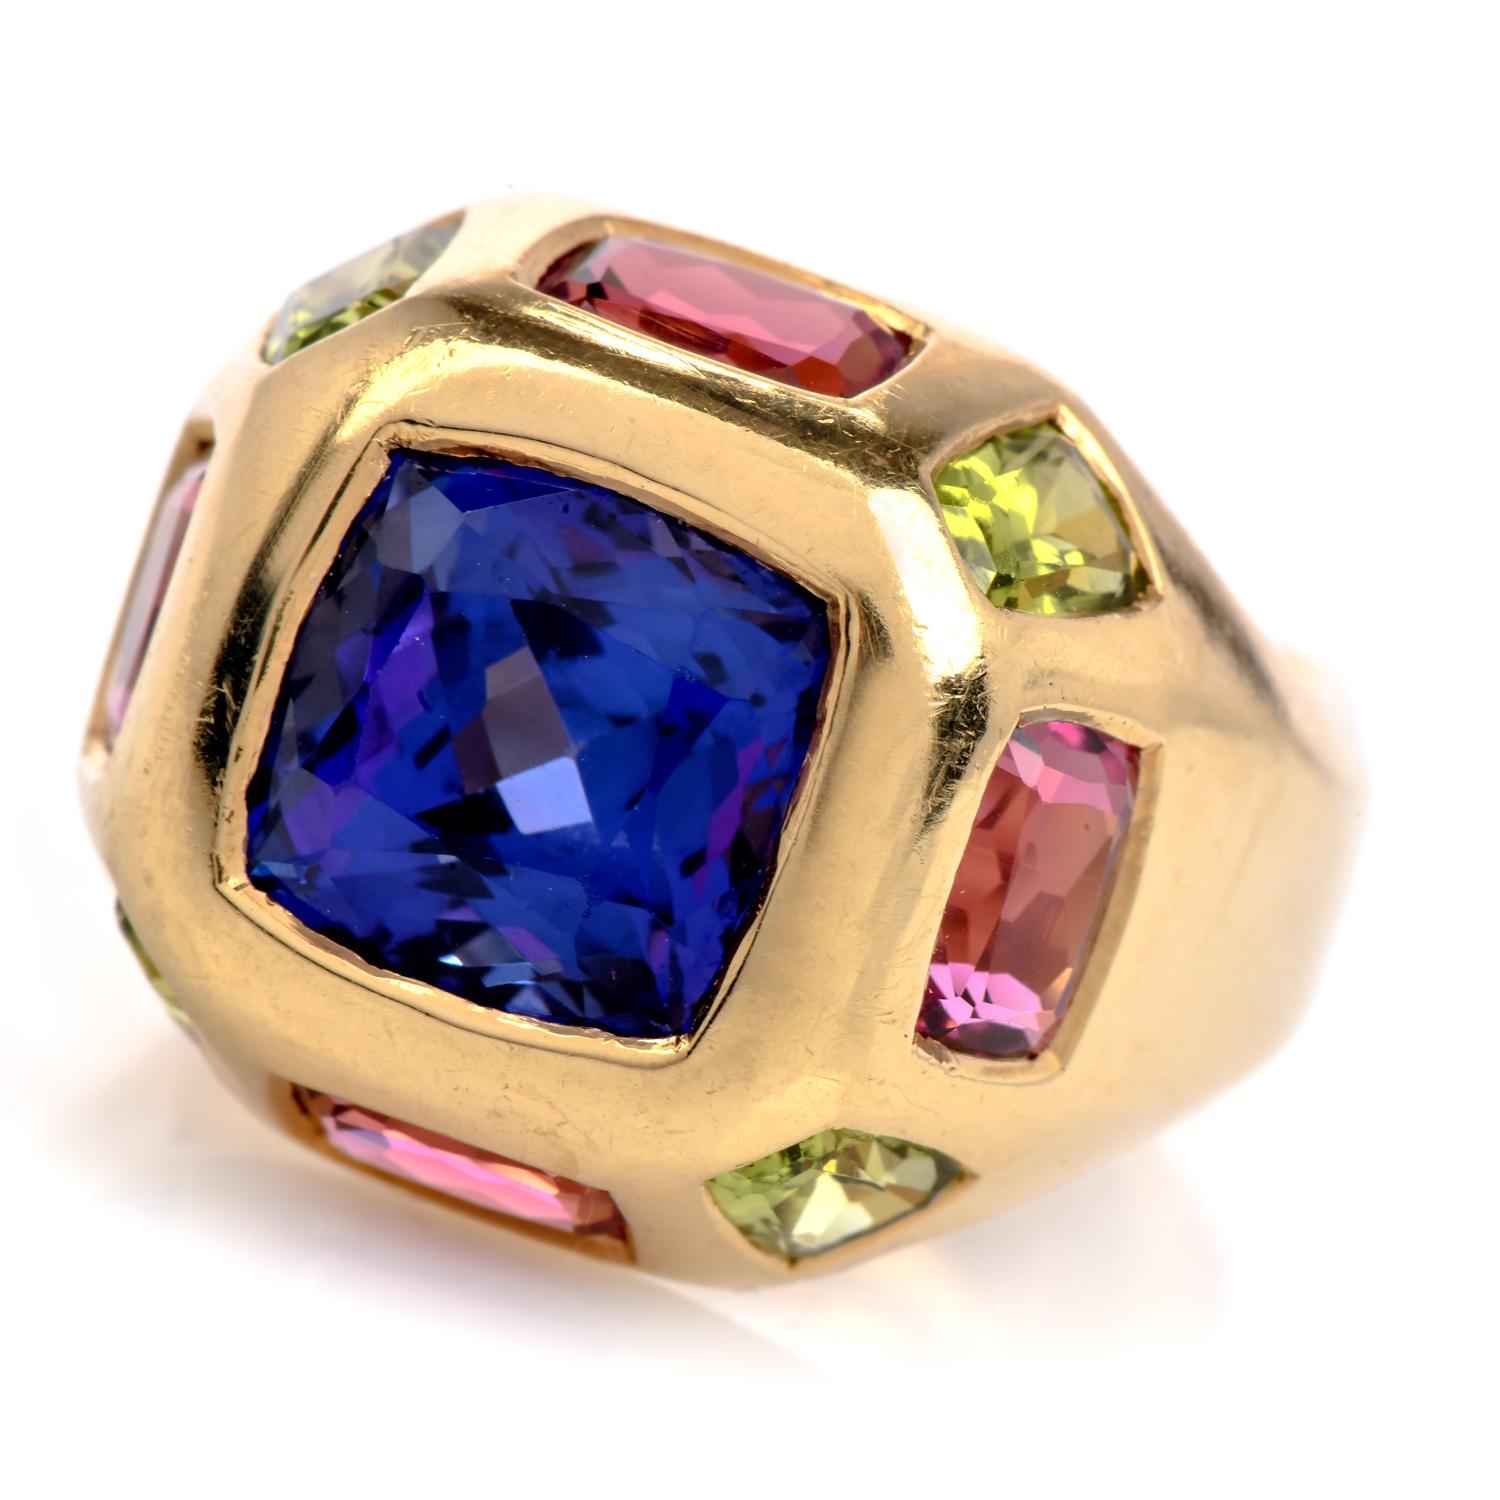 Estate Tanzanite Tourmaline Statement Ring

Forged from 18-karat gold, it boasts a magnificent  approx 6.00 carat natural Tanzanite at its heart. The cushion-cut gemstone emanates a deep violet-blue hue, reminiscent of twilight skies.

Encircling